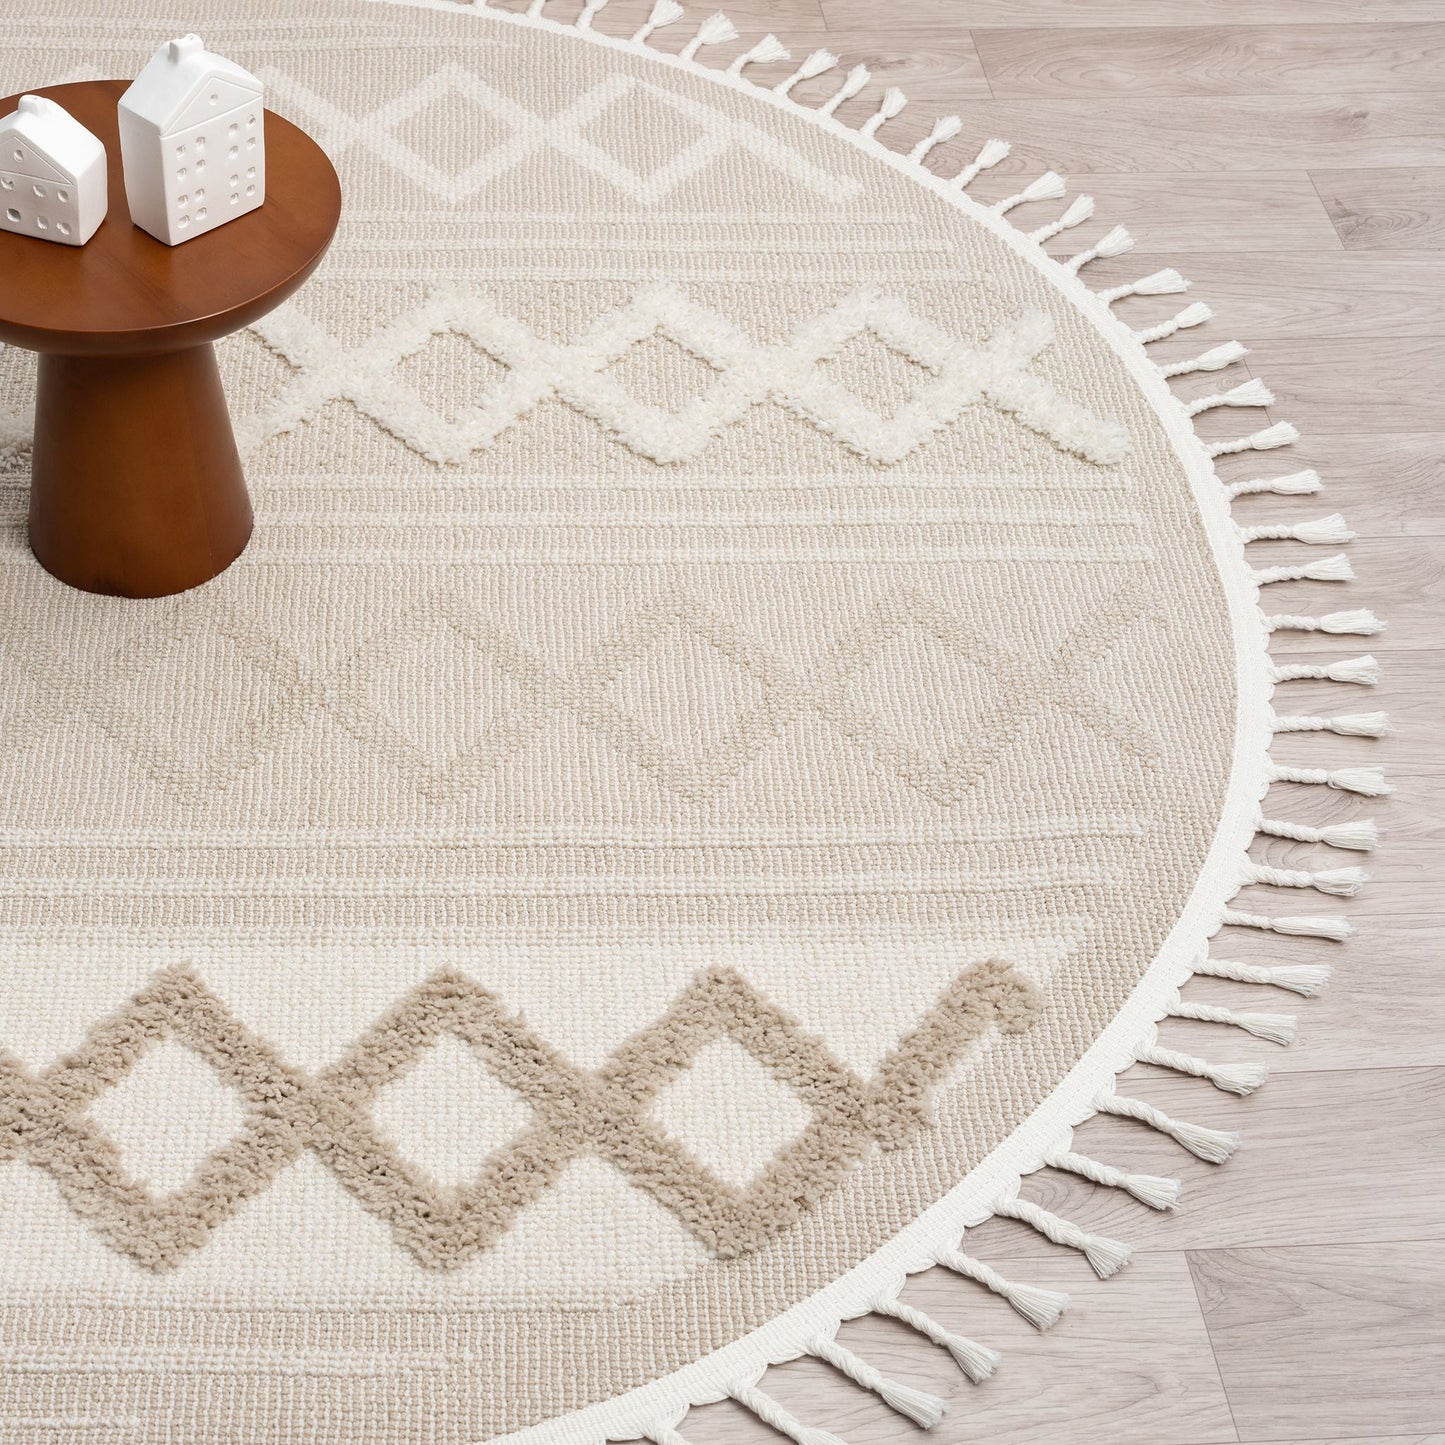 Cottage 542 Fawn Round Saray Rugs